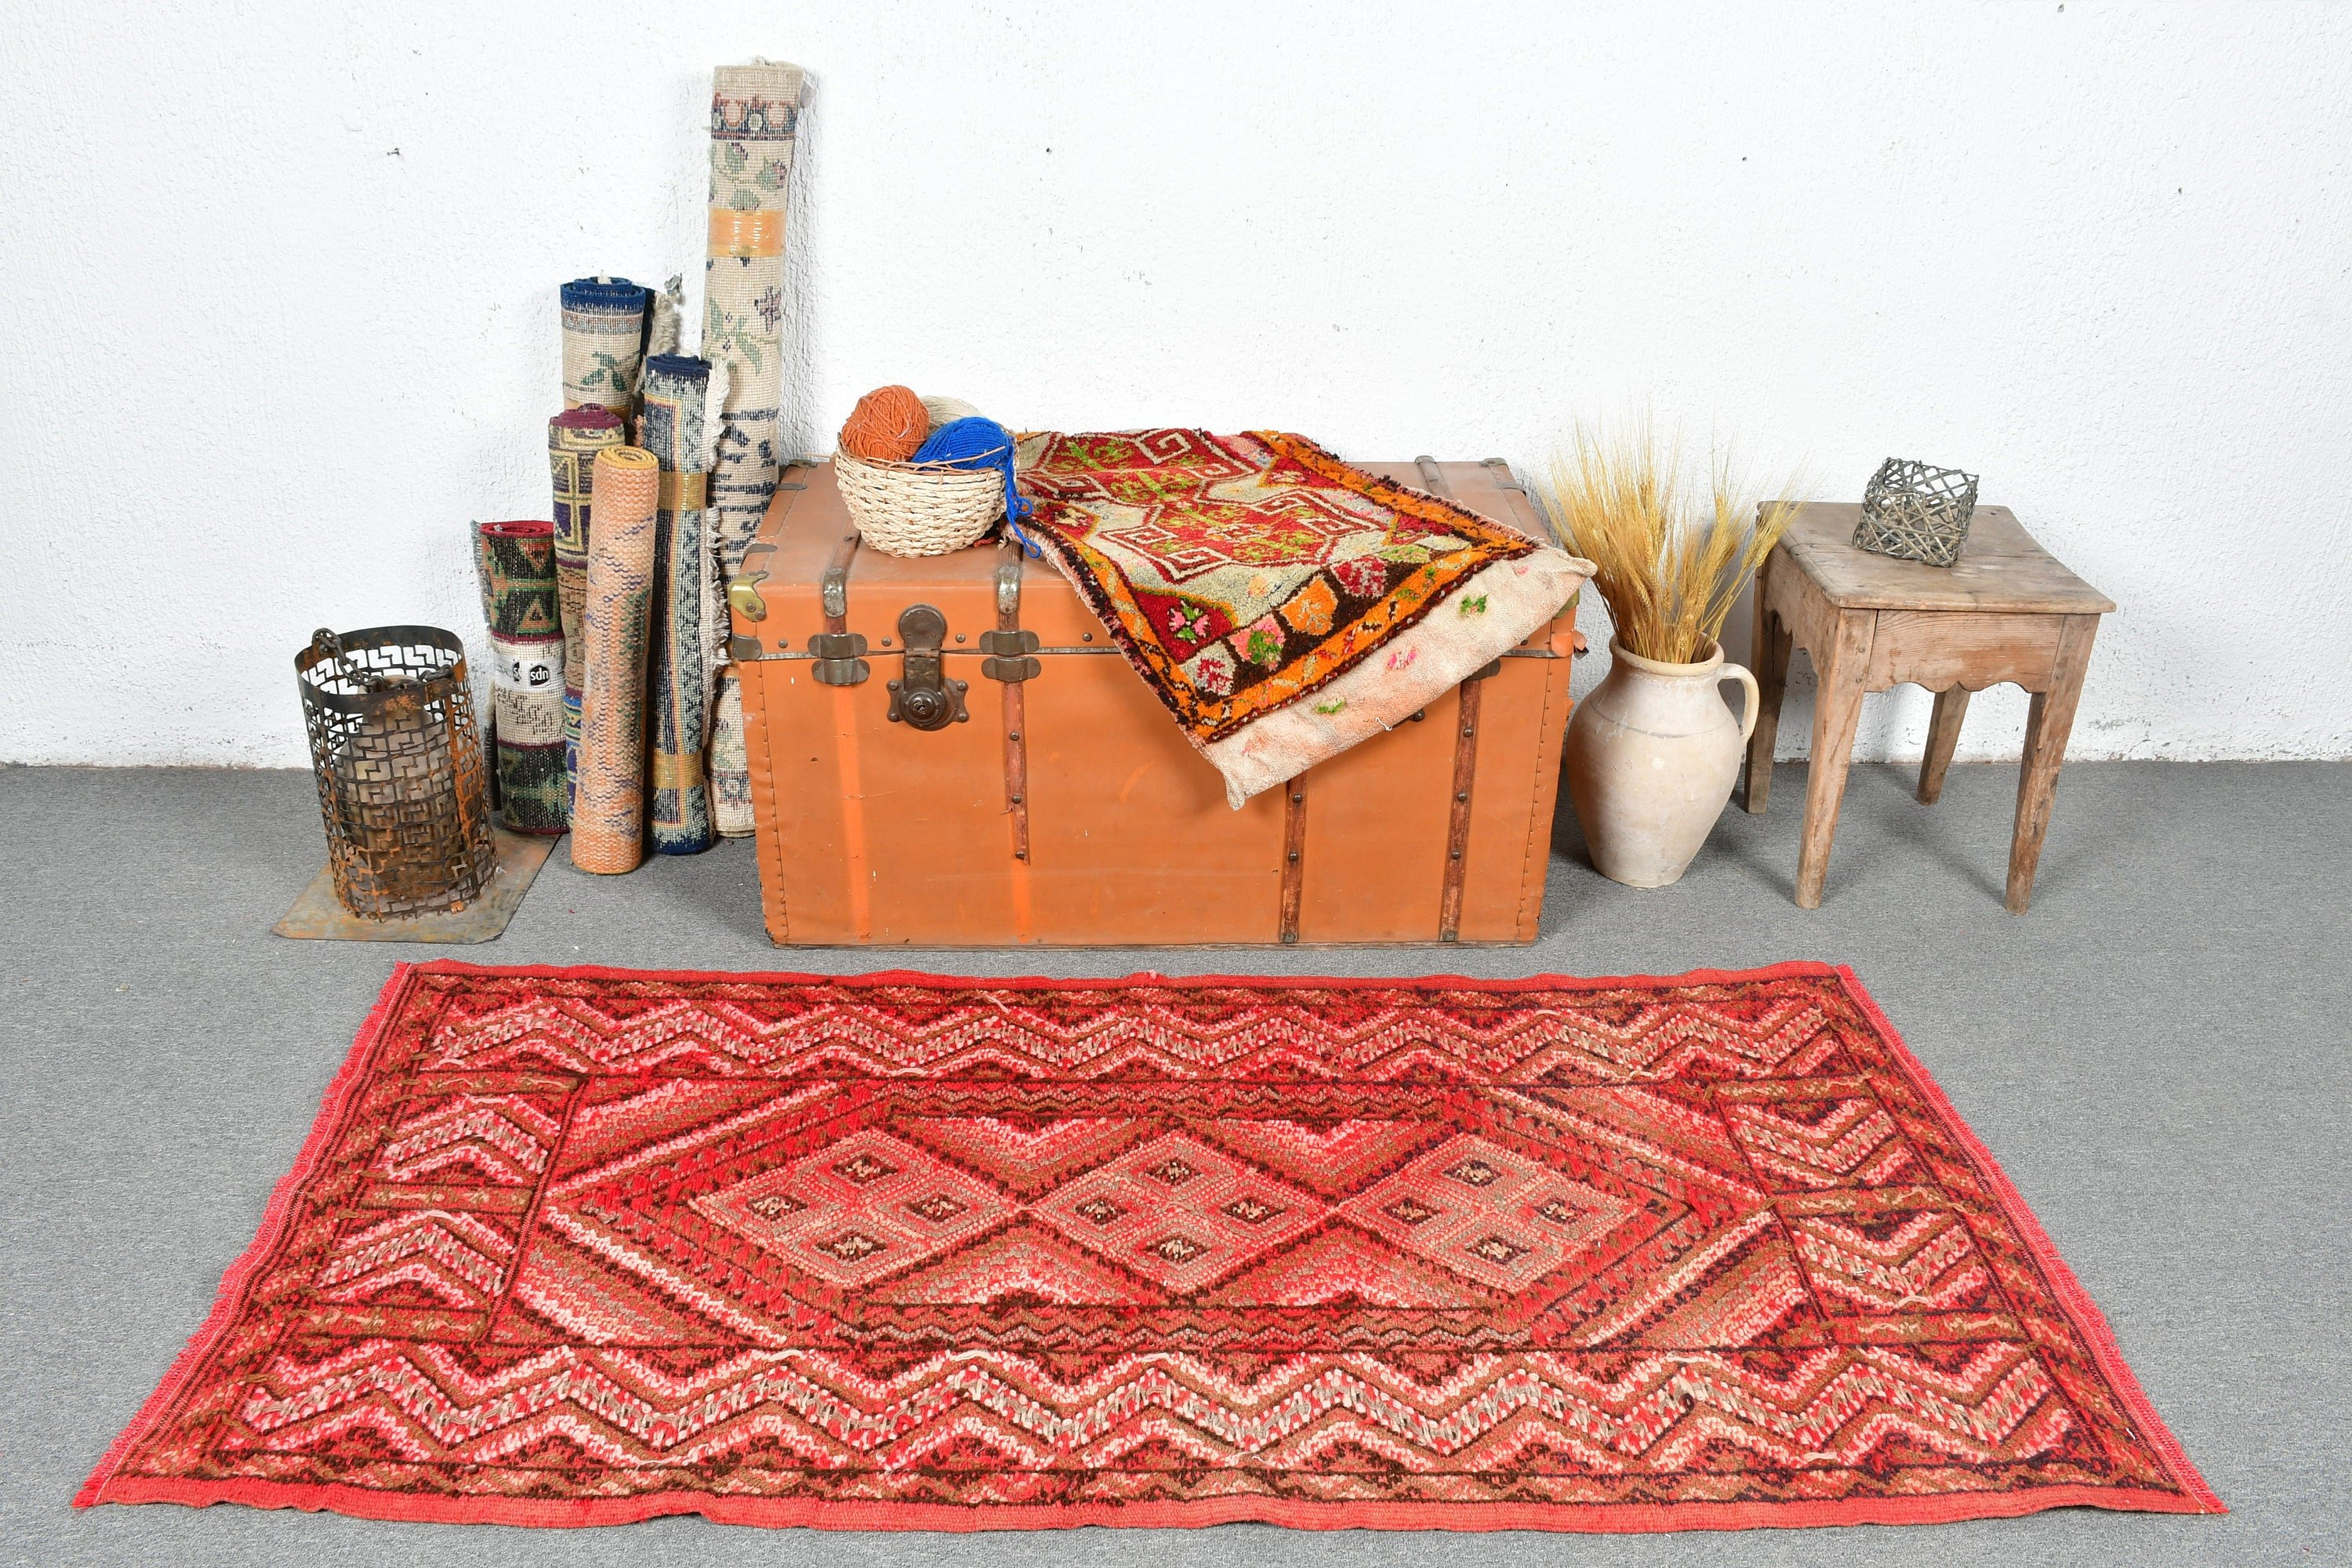 Wool Rug, Kitchen Rug, Turkish Rugs, Red  2.9x6 ft Accent Rugs, Entry Rug, Vintage Rugs, Rugs for Kitchen, Moroccan Rug